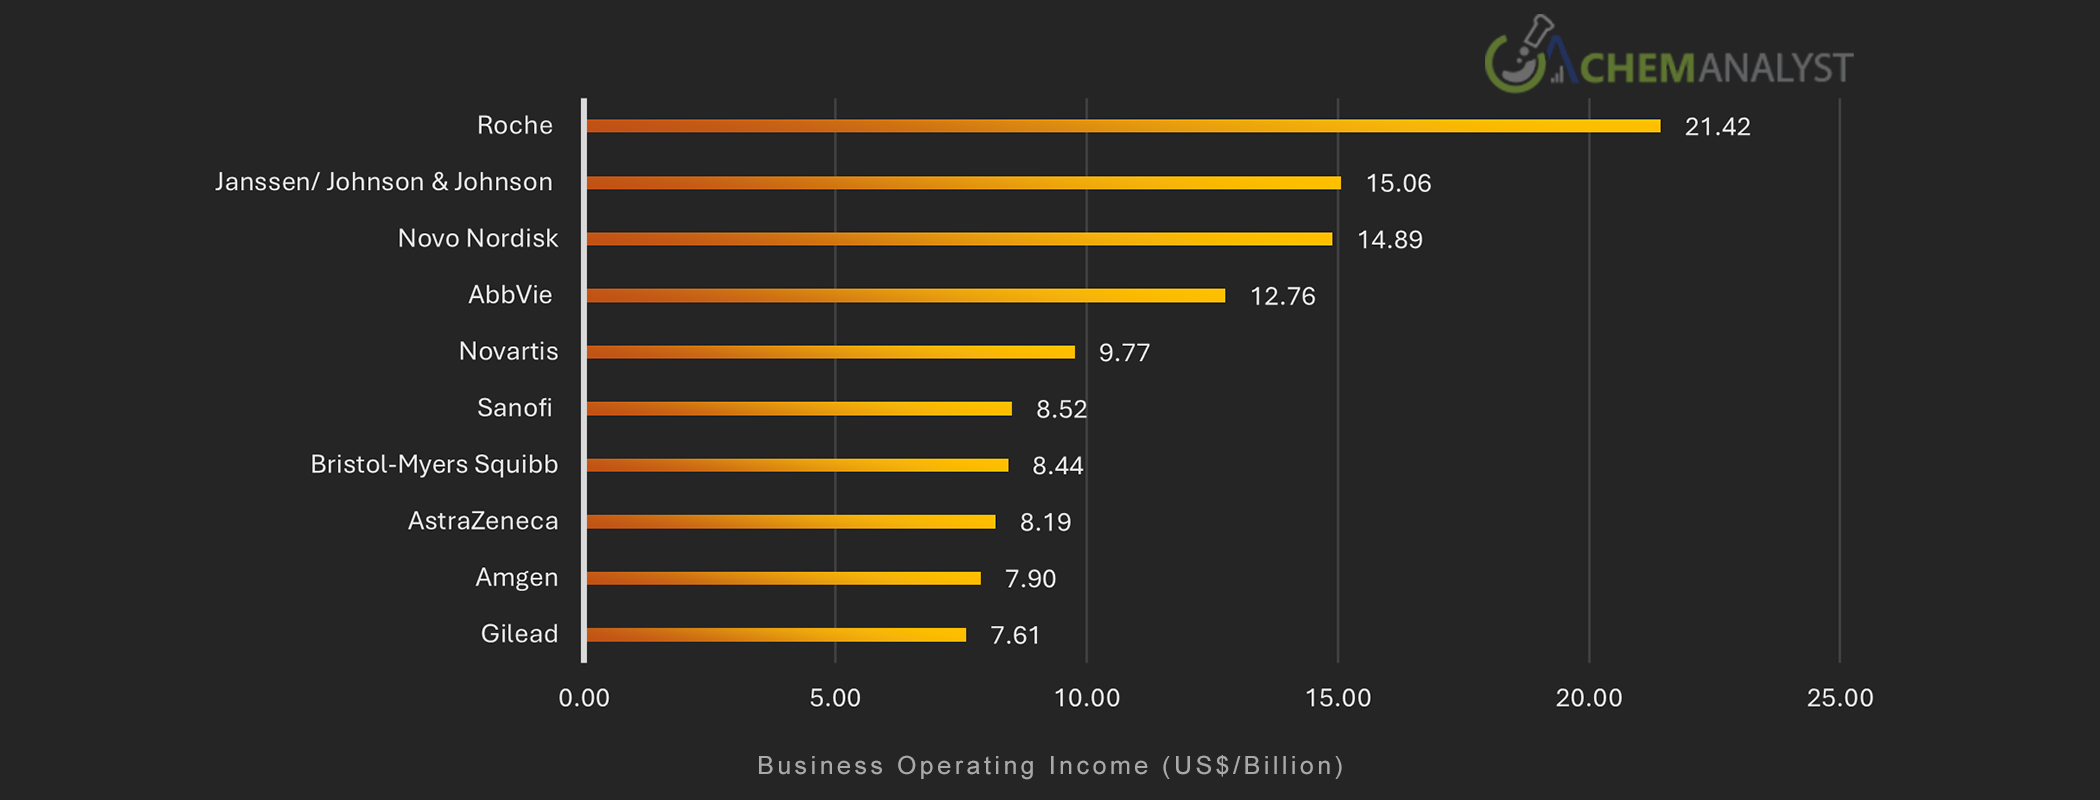 Top 10 Companies by Business Operating Income